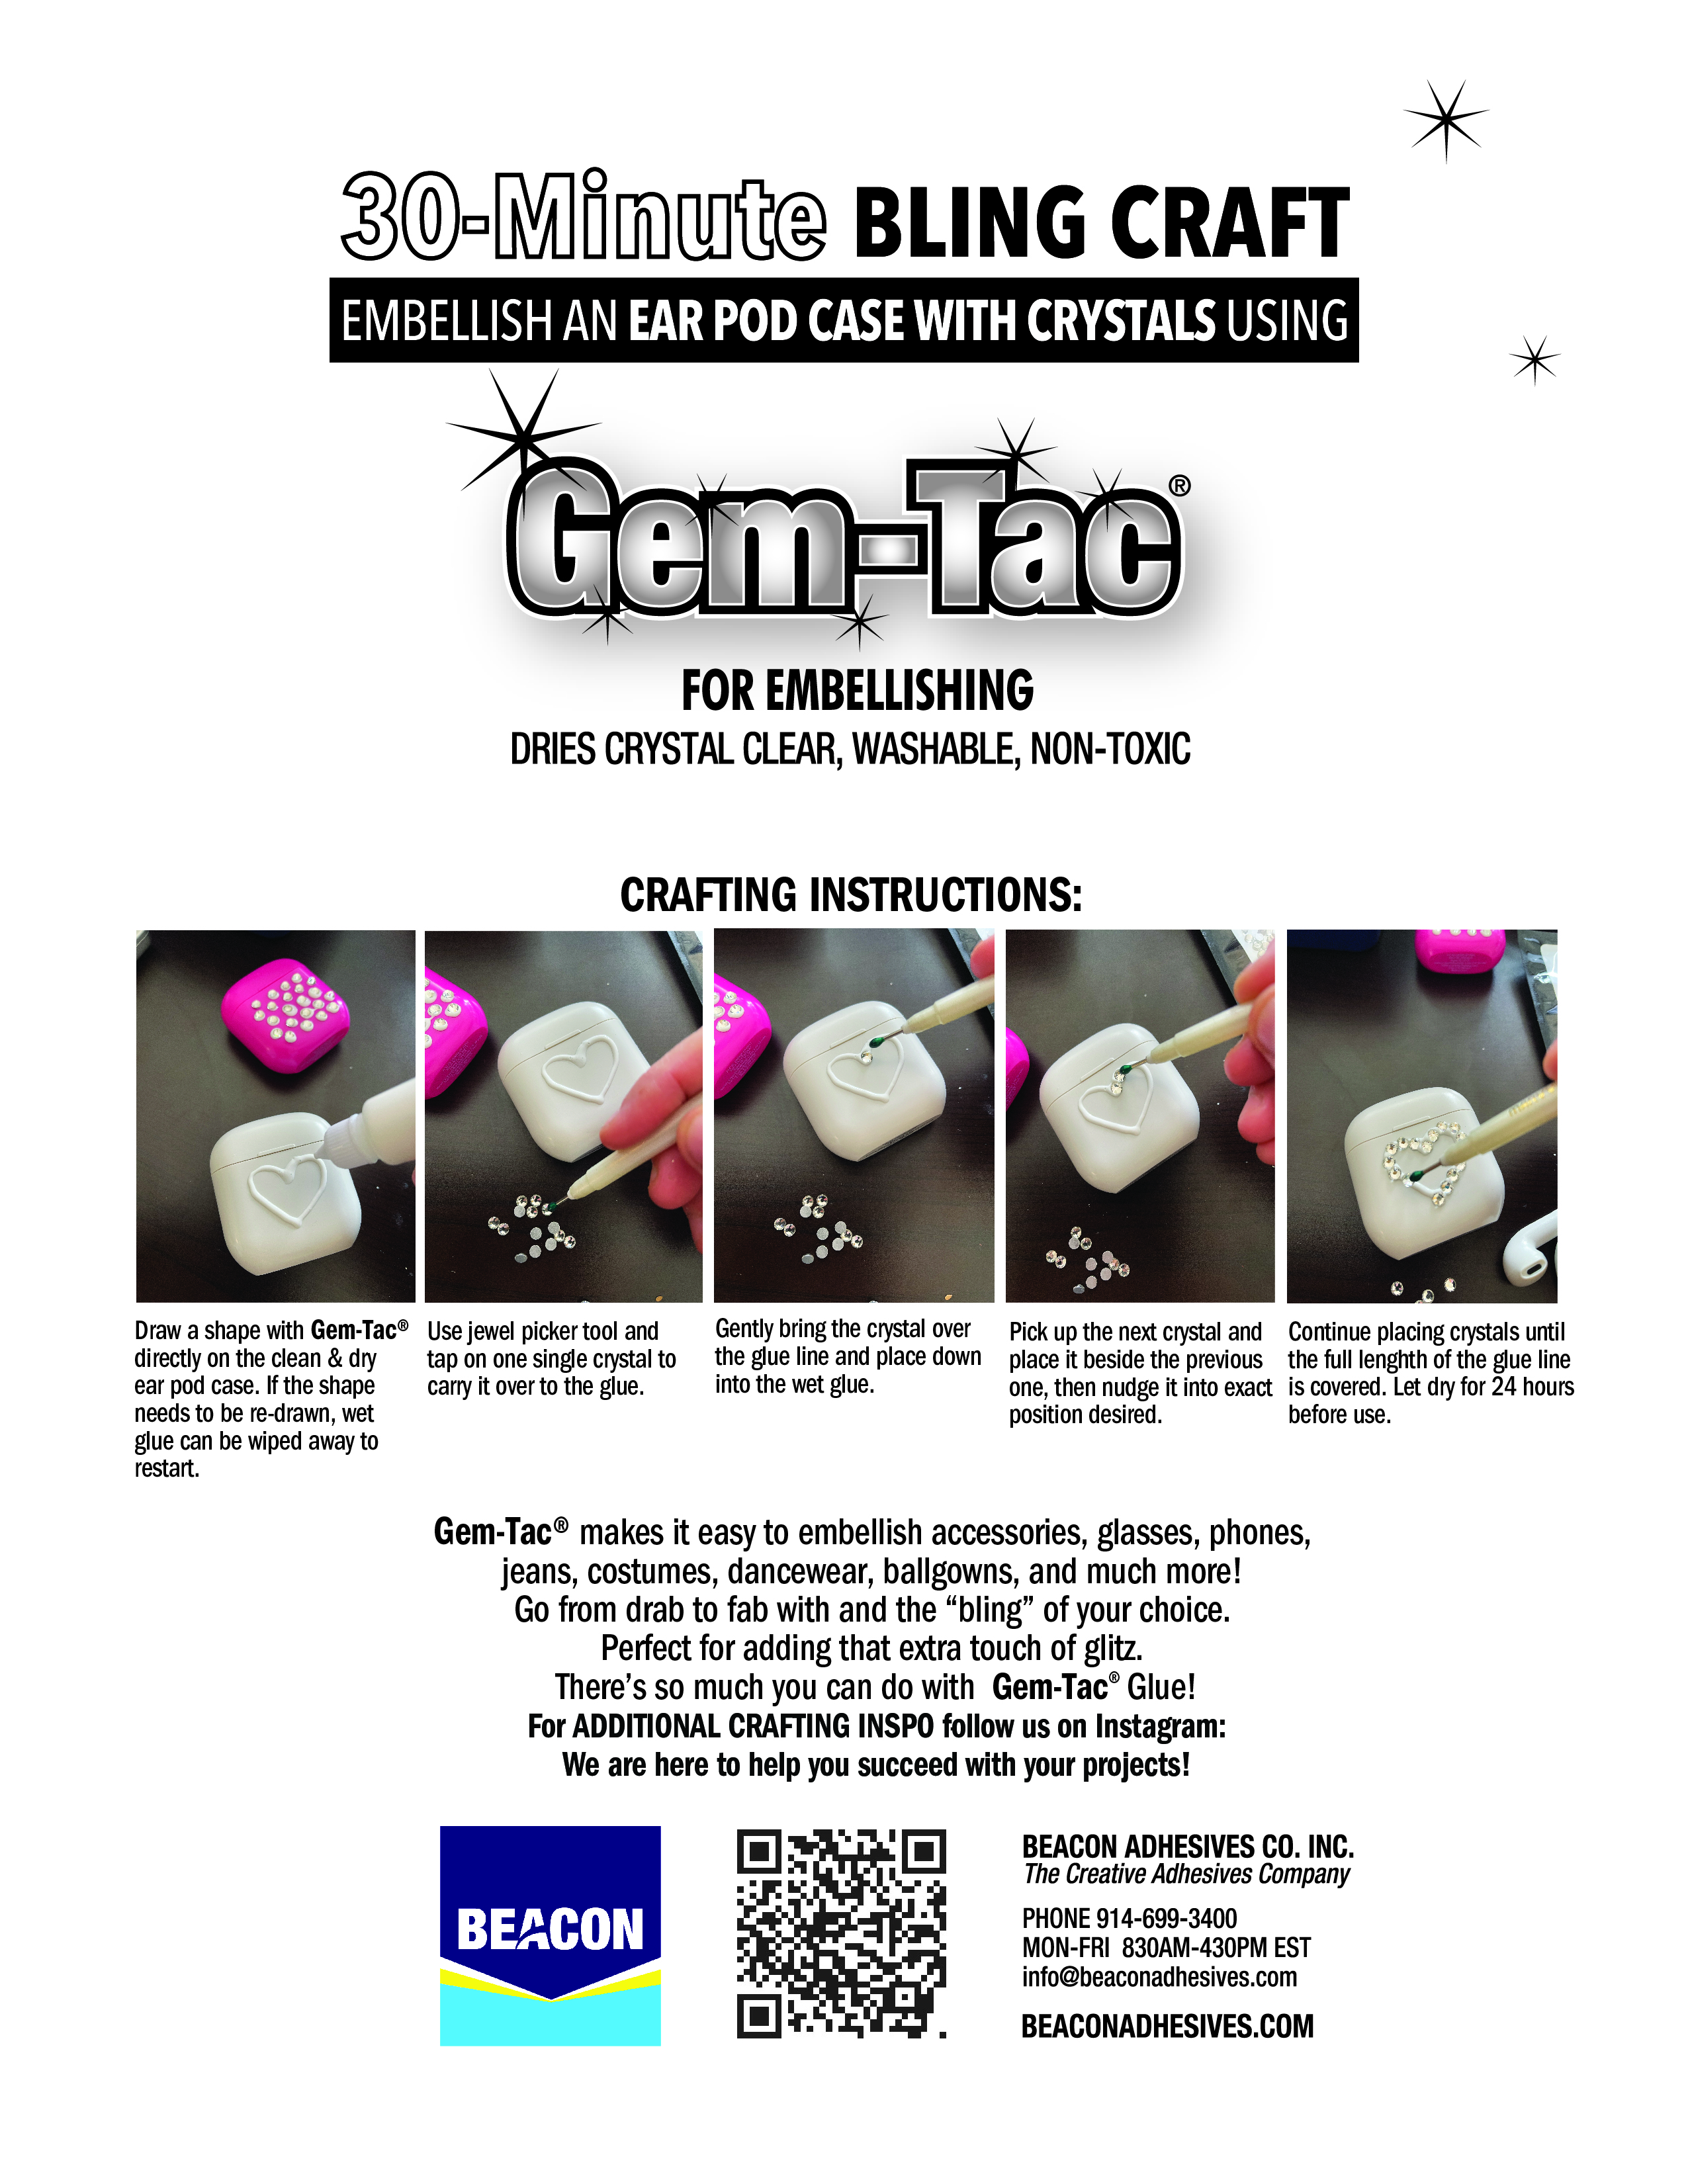 Beacon Gem-tac™ Glue in Needle Precision Tip Bottle for Attaching  Rhinestones, Crystals, Pearls & Other Embellishments to Various Surfaces 